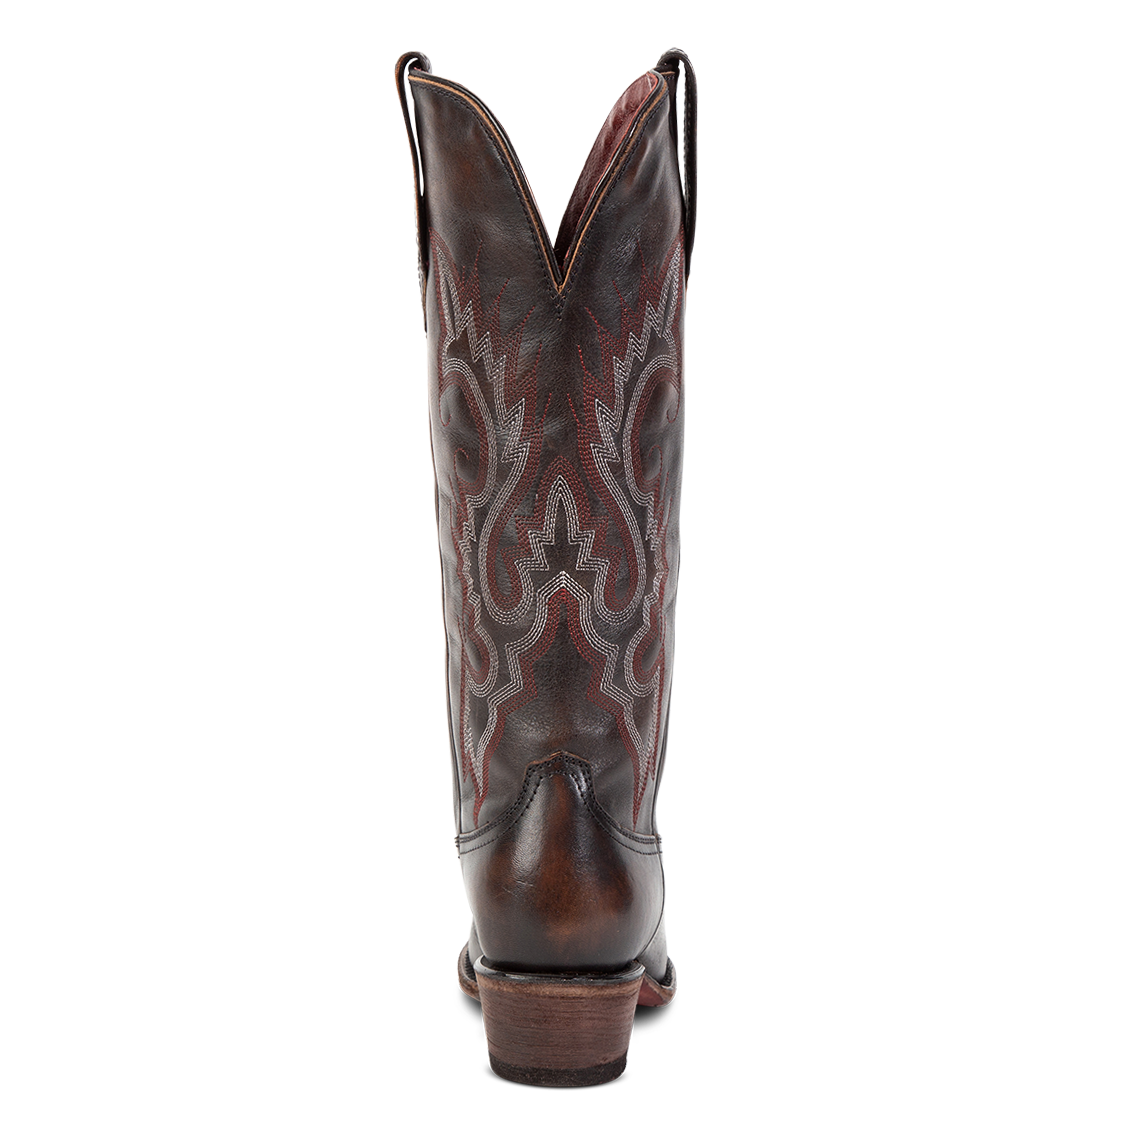 Back view showing back dip and leather heel with western stitch detailing on FREEBIRD women's Woodland black leather boot